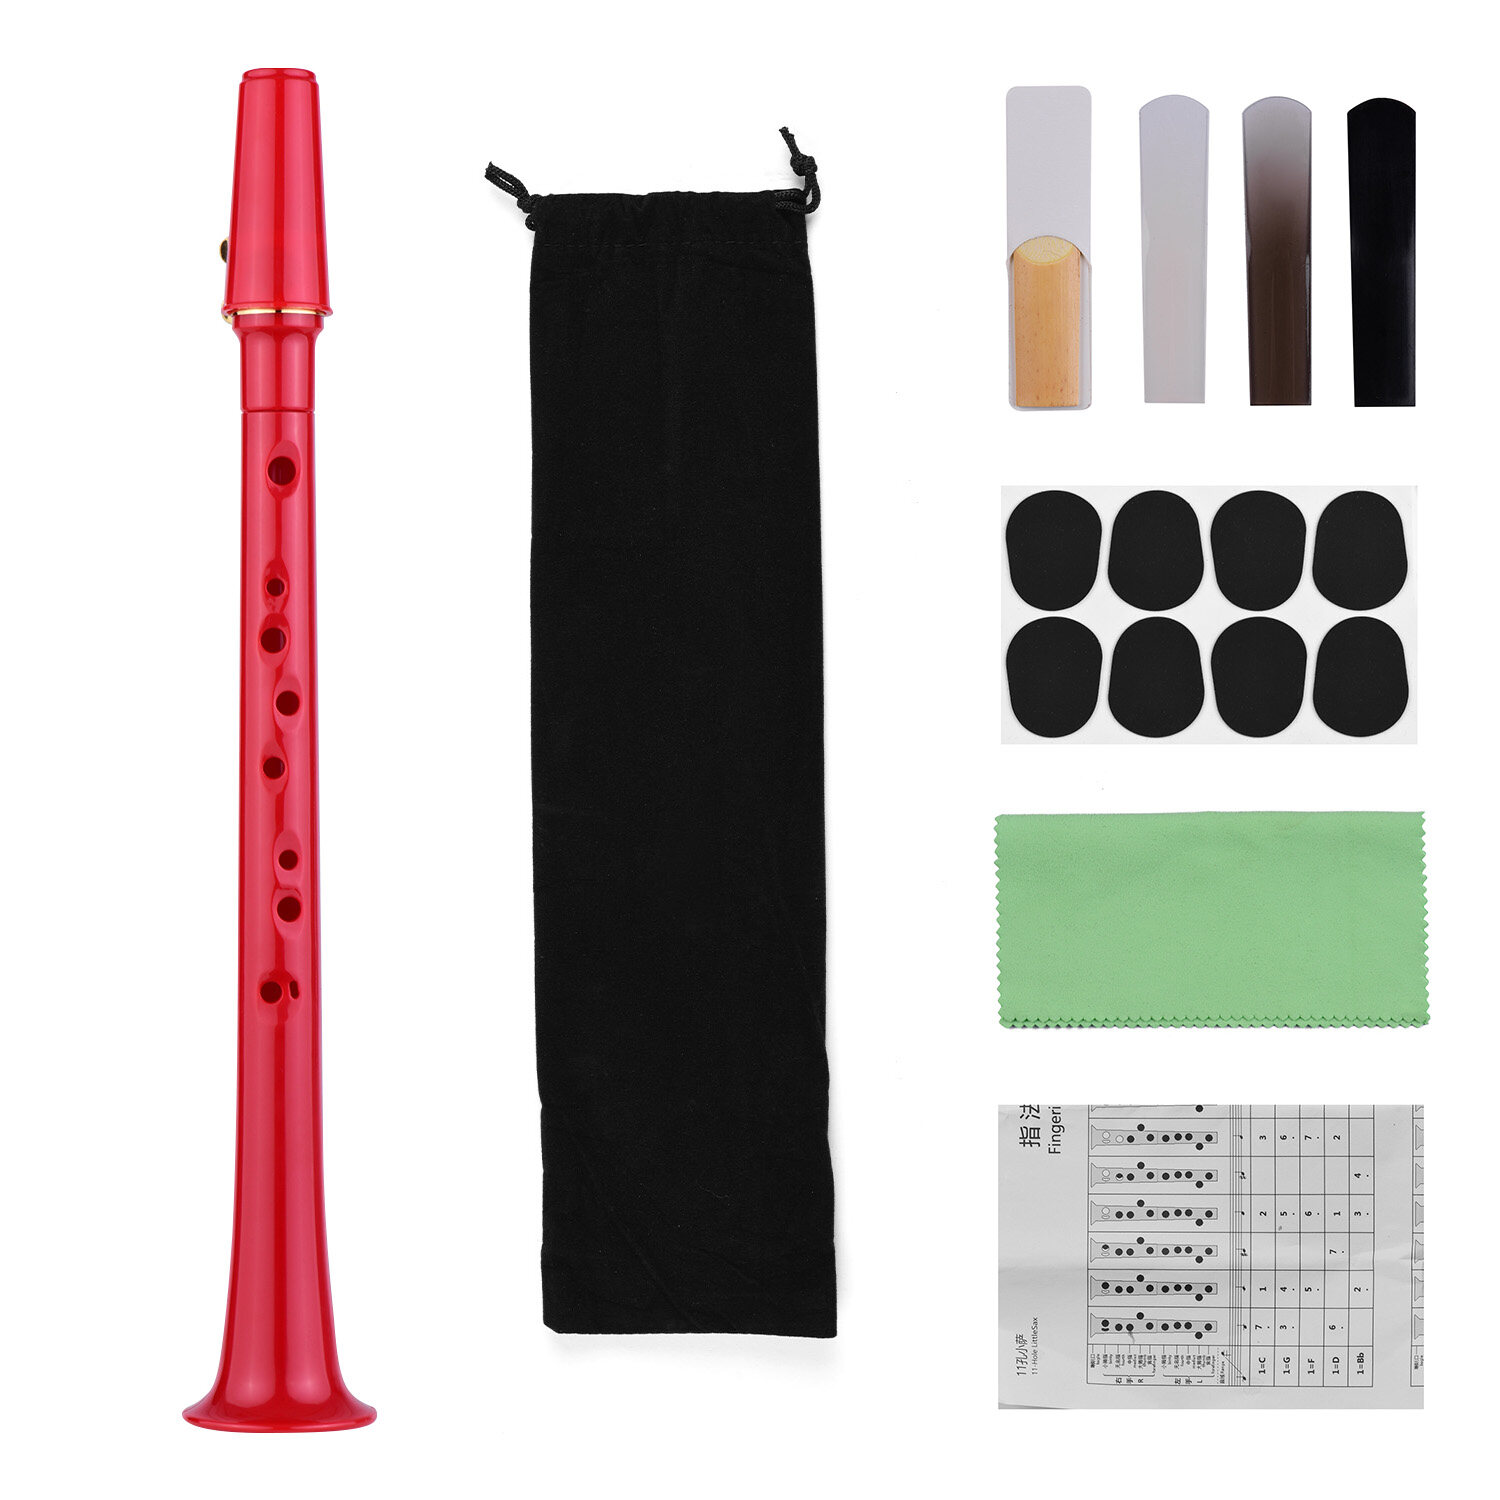 Tomshine 11-hole Mini Pocket Saxophone ABS with Alto Mouthpiece Ligature  4pcs Reeds 8pcs Pads Finger Charts Cleaning Cloth Carrying Bag 